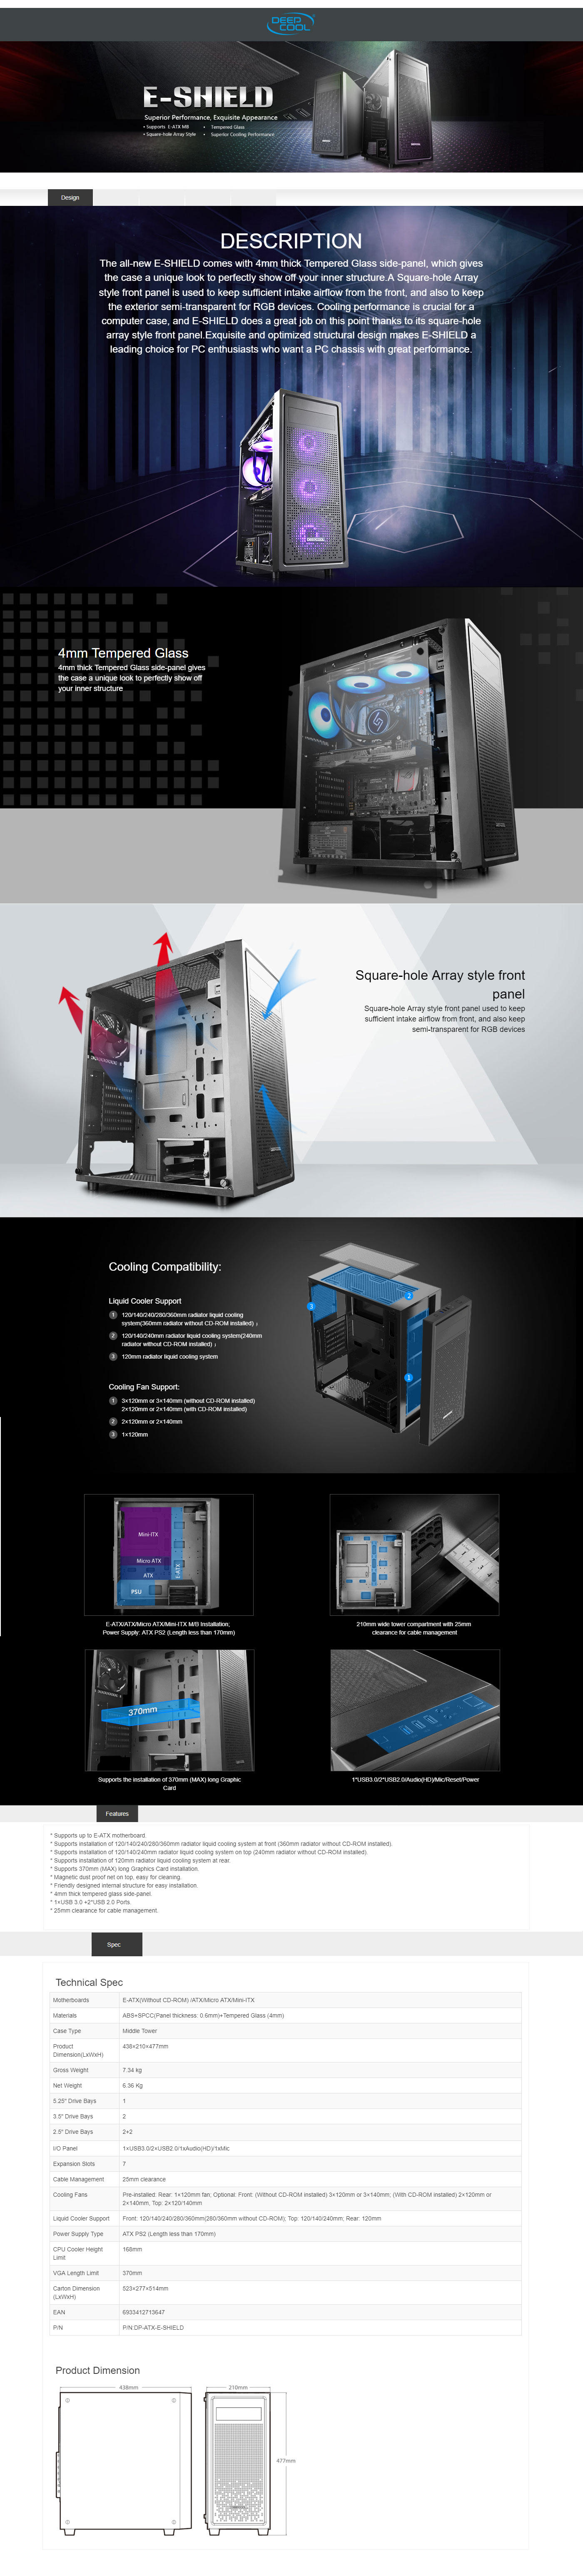  Buy Online Deepcool E-SHIELD Tempered Glass Middle Tower Computer Case